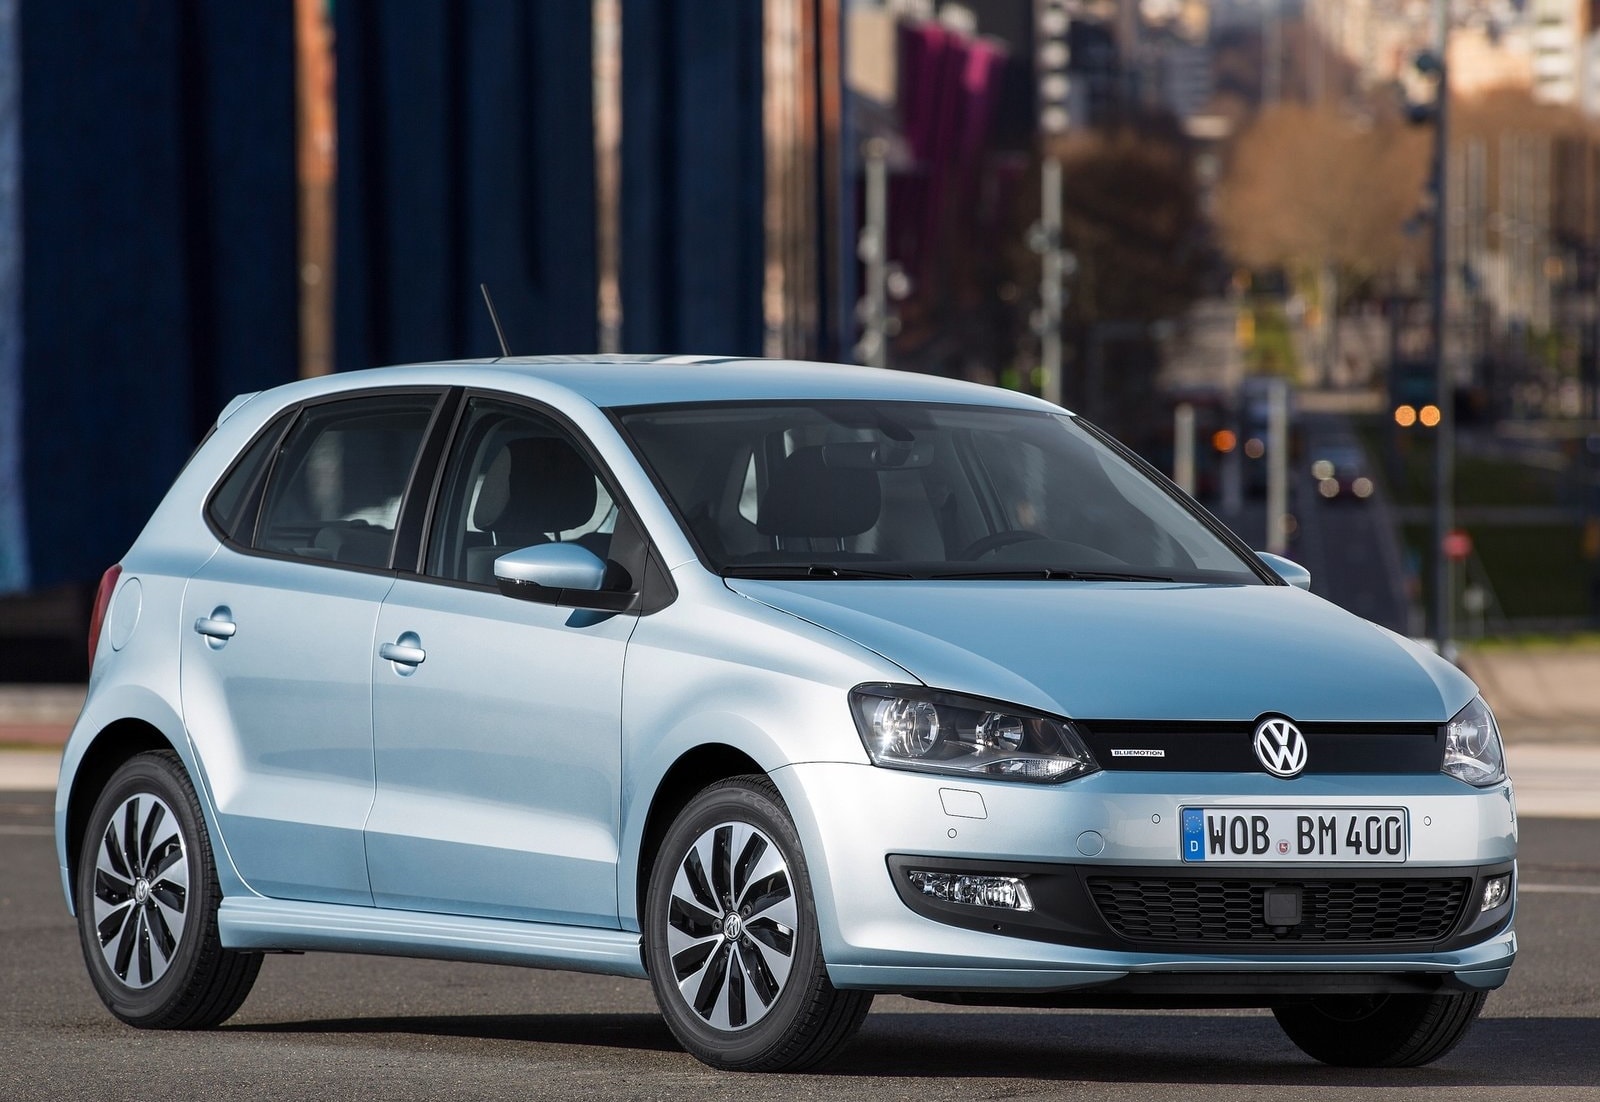 Quietly Discontinues Polo TDI BlueMotion Due to Slow Sales - autoevolution